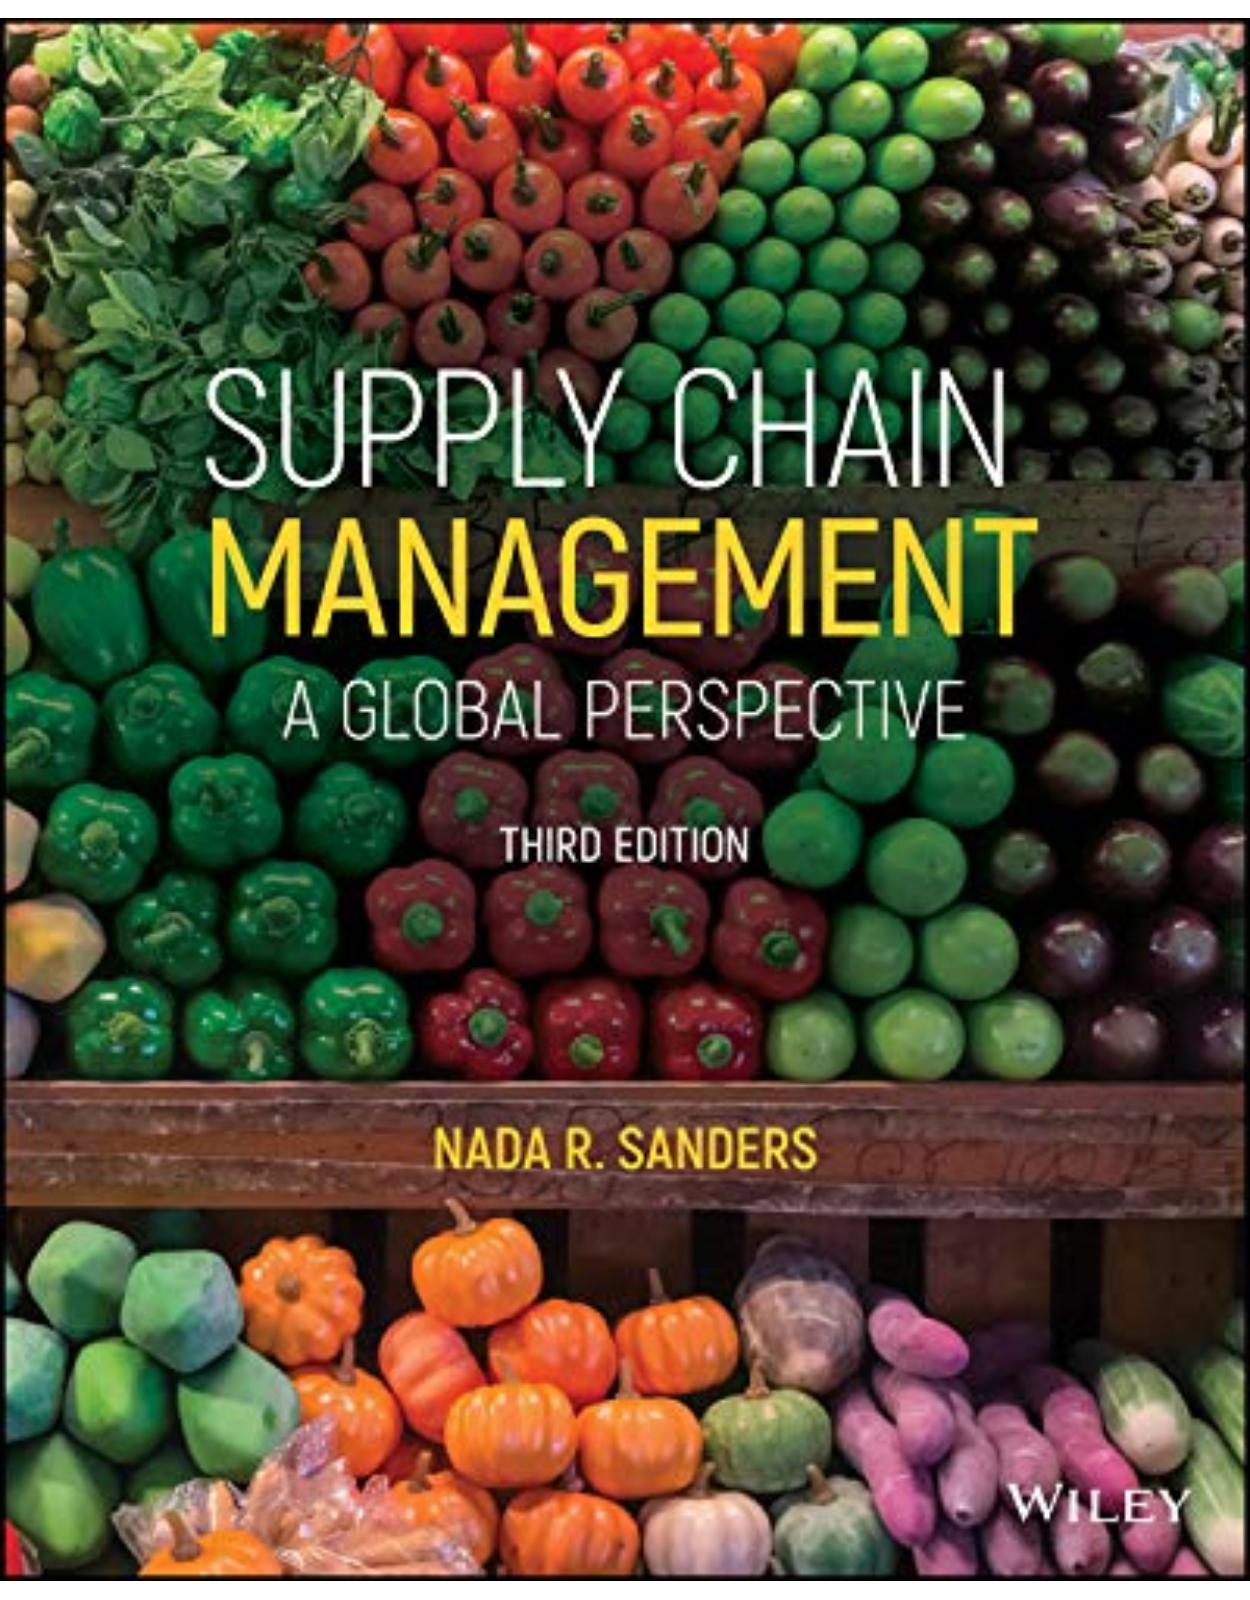 Supply Chain Management: A Global Perspective